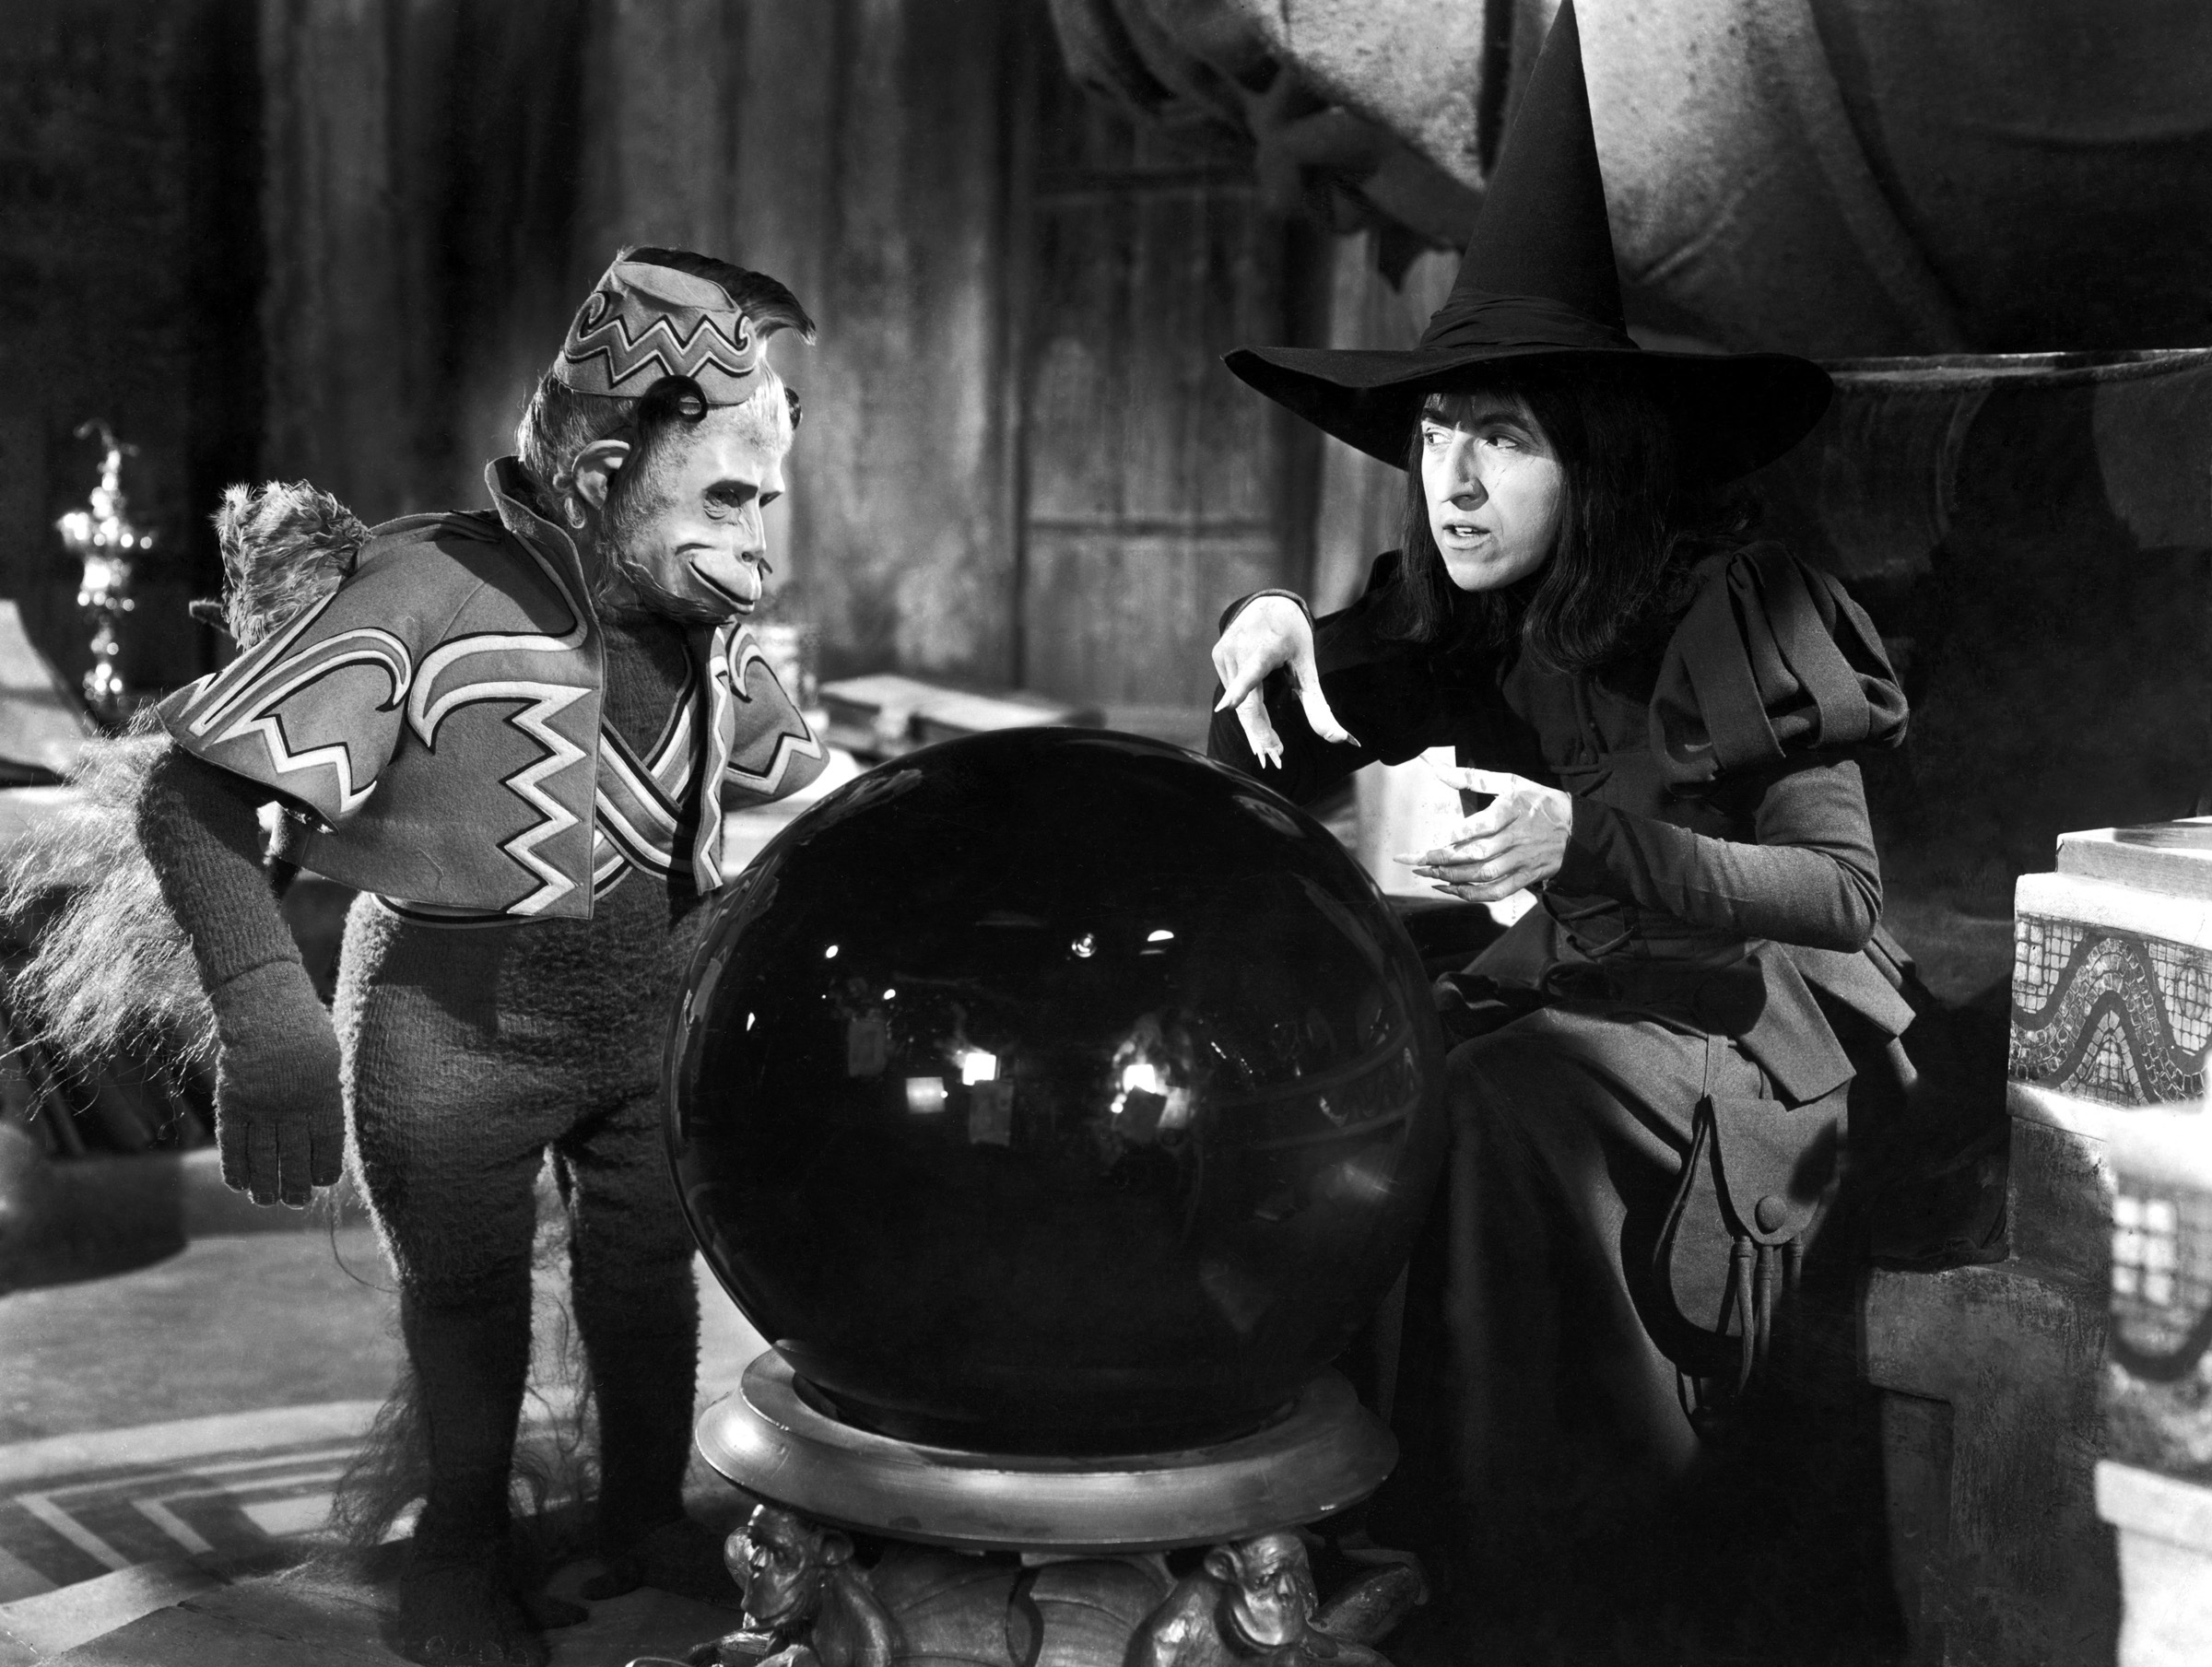 Wizard of Oz, The (1939)